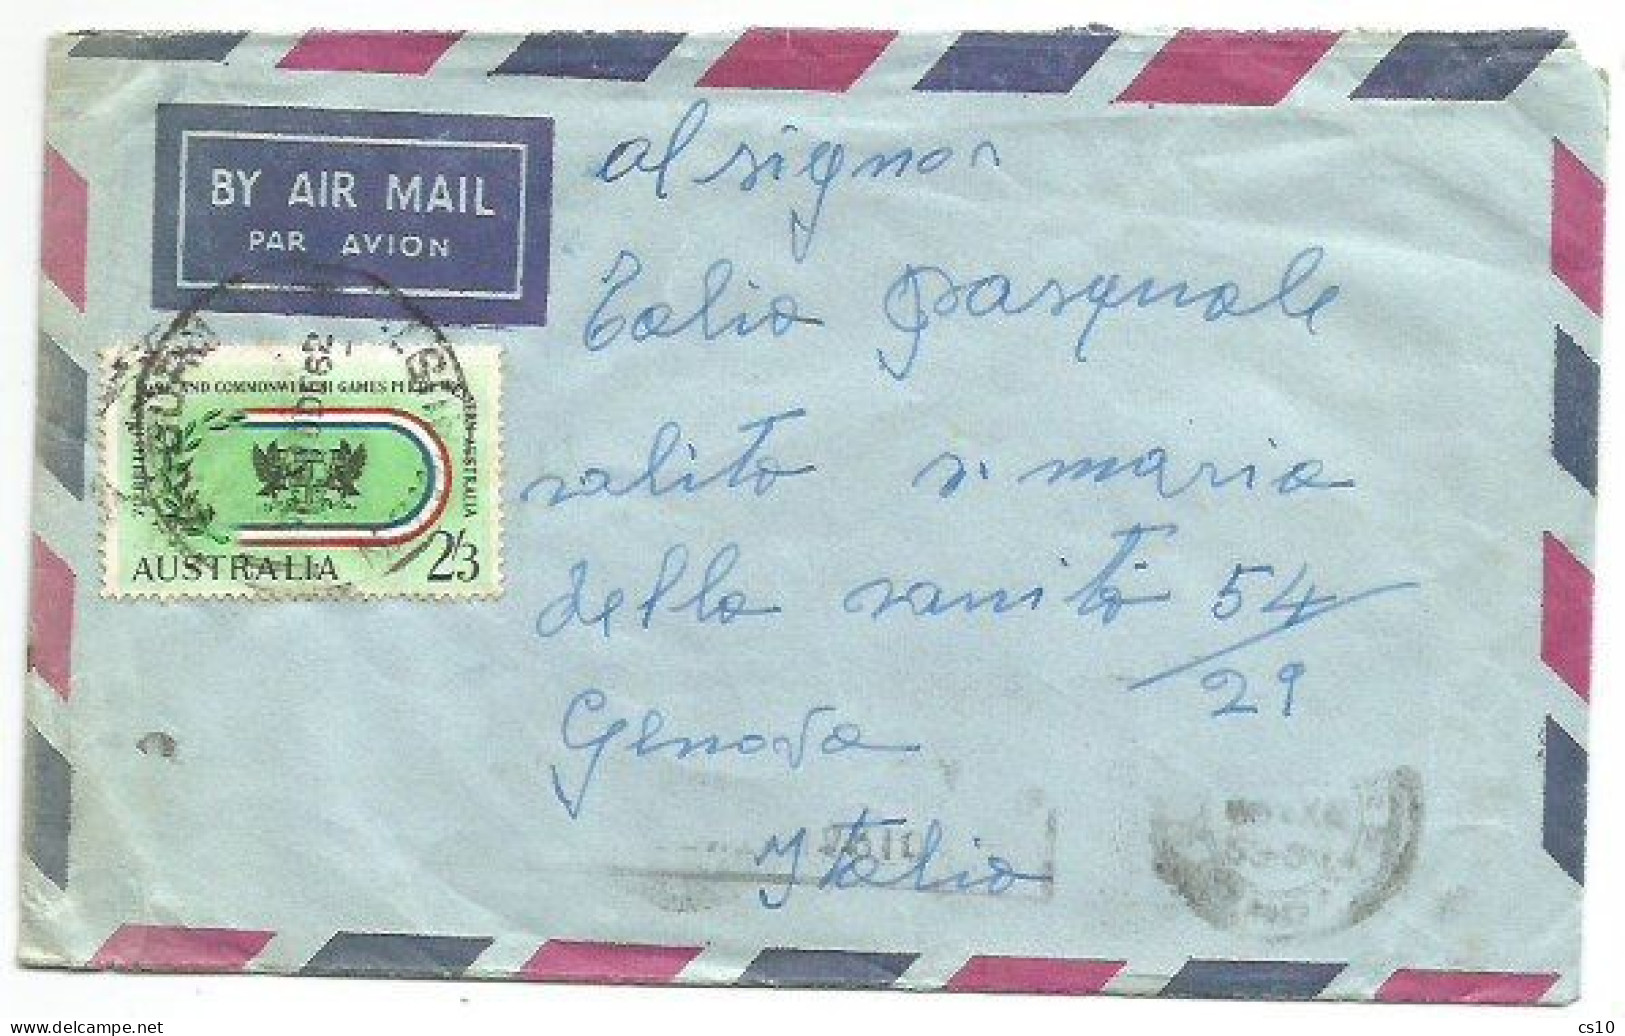 Australia Commonwealth Games 2S3 Solo Franking Airmail Cover Sidney 10dec1962 X Italy - Covers & Documents